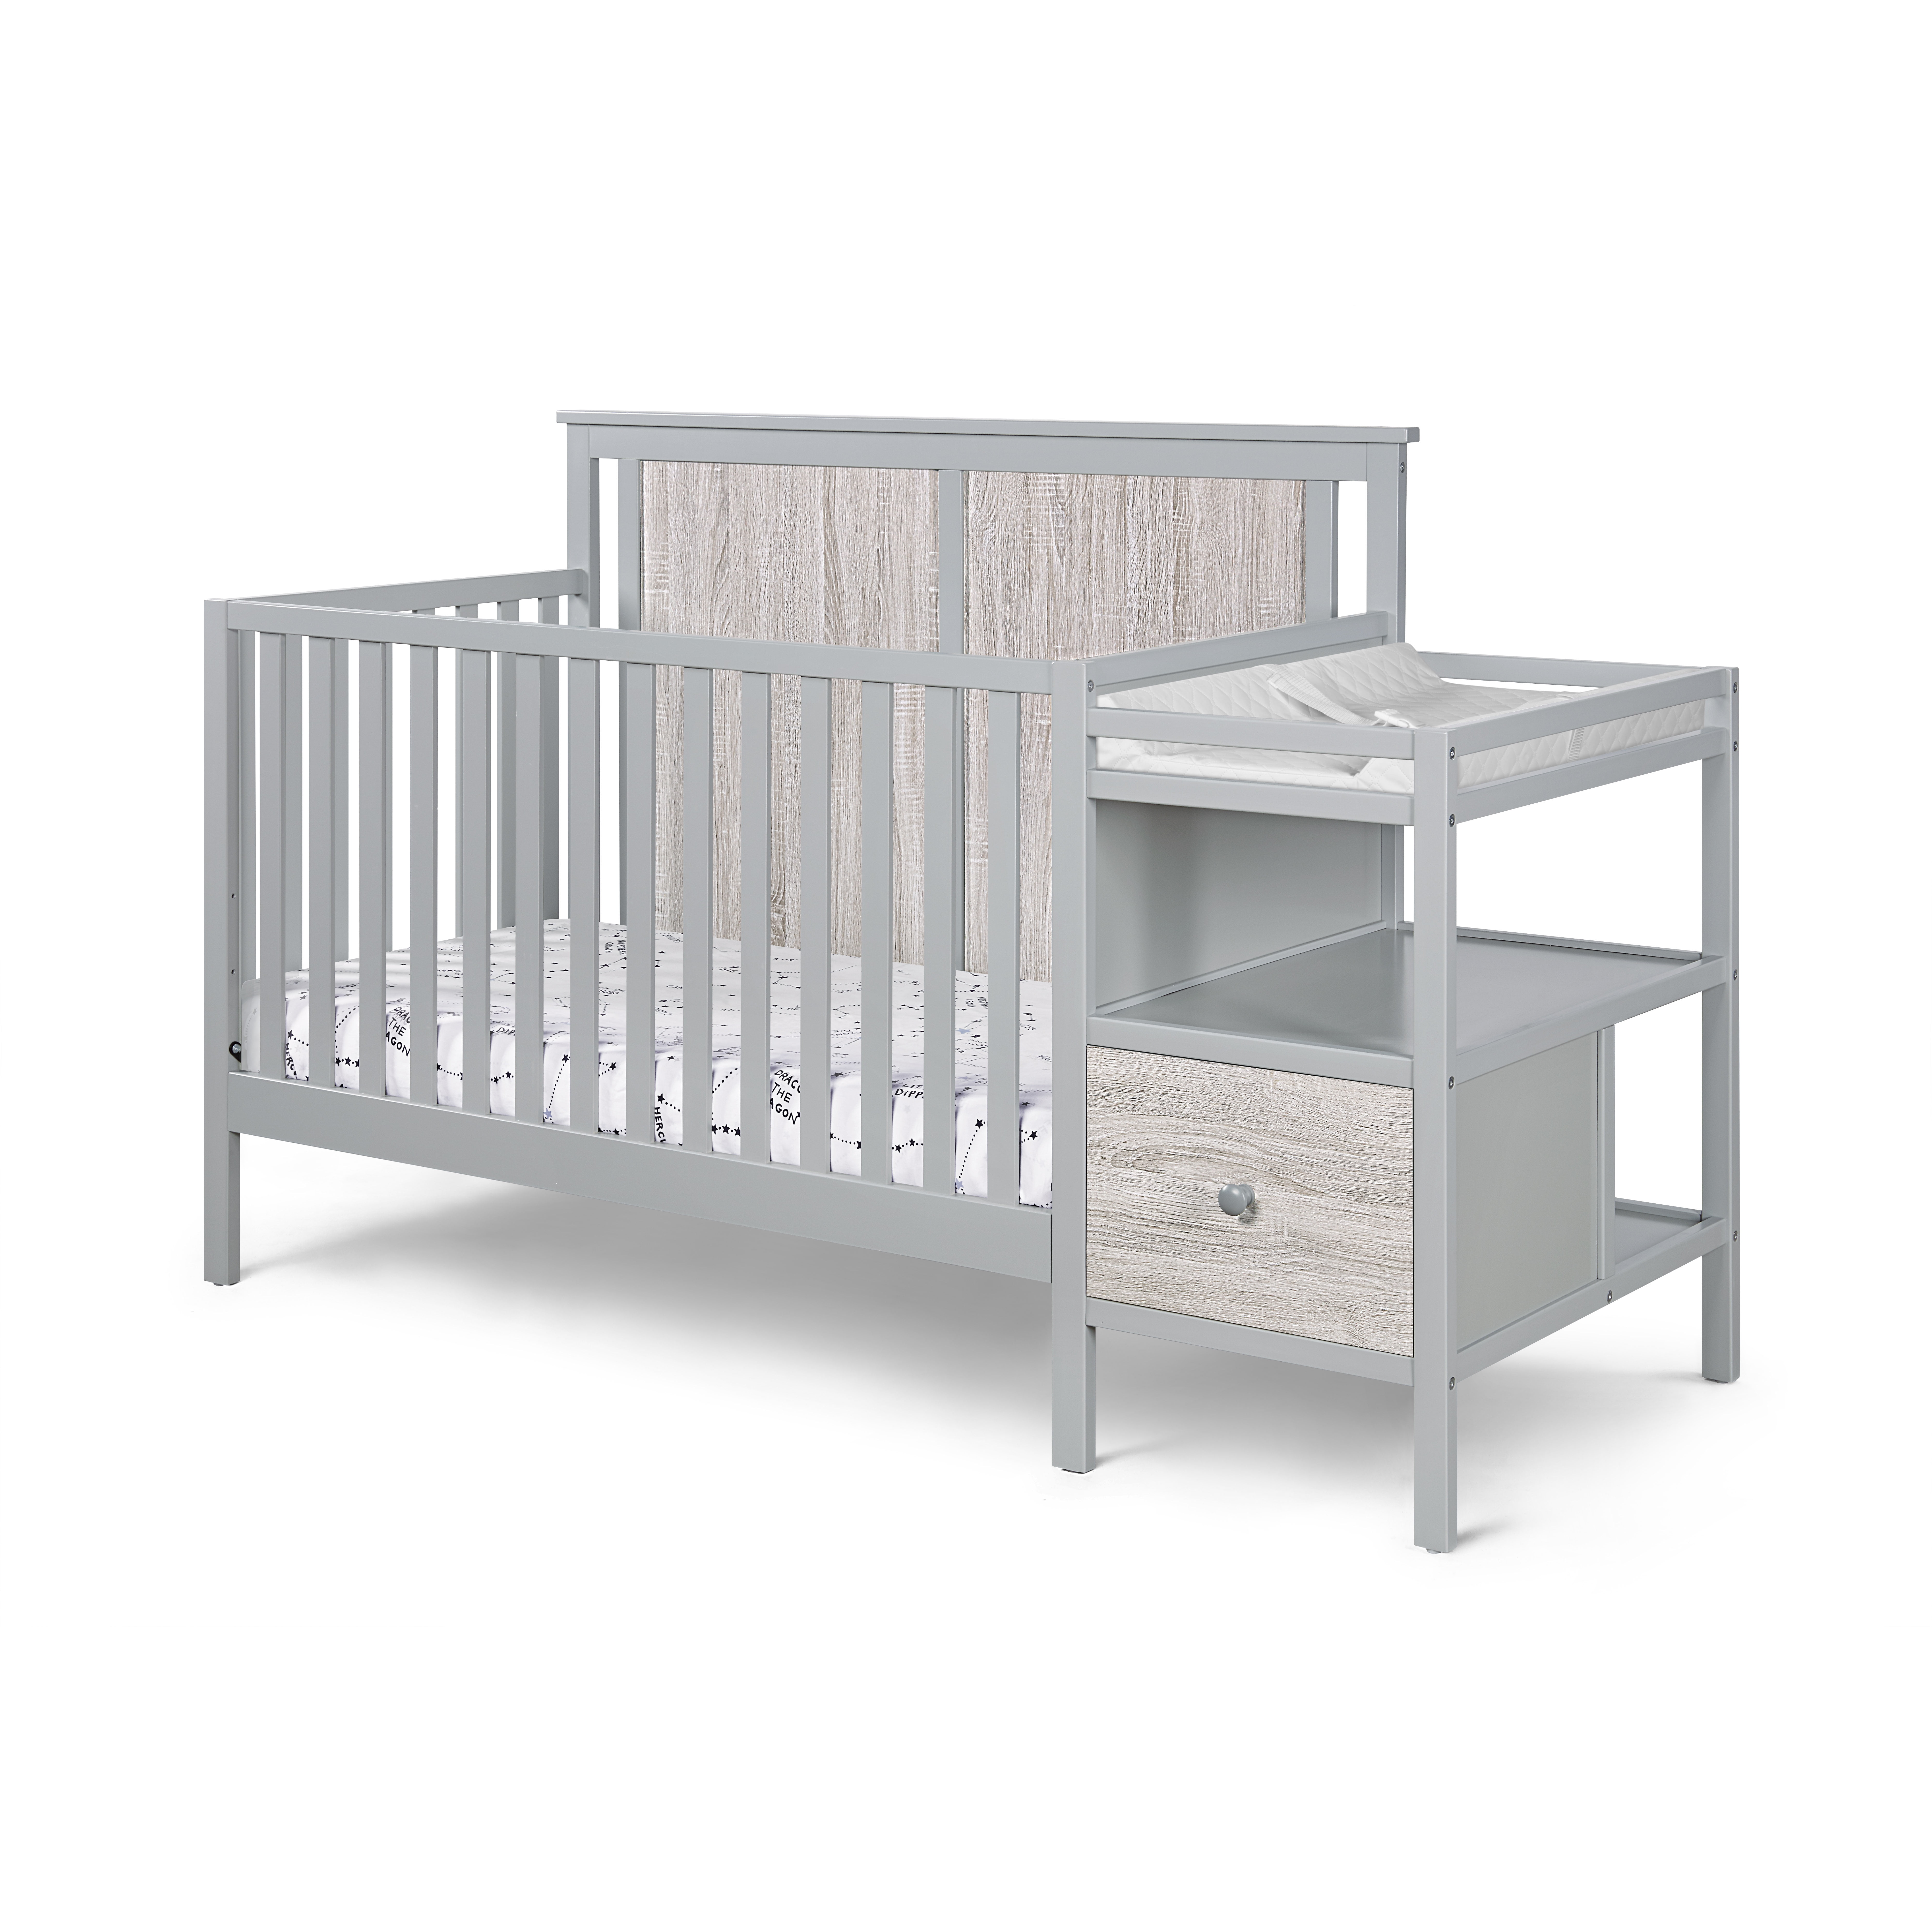 Suite Bebe Connelly 4 in Convertible Crib and Changer Combo